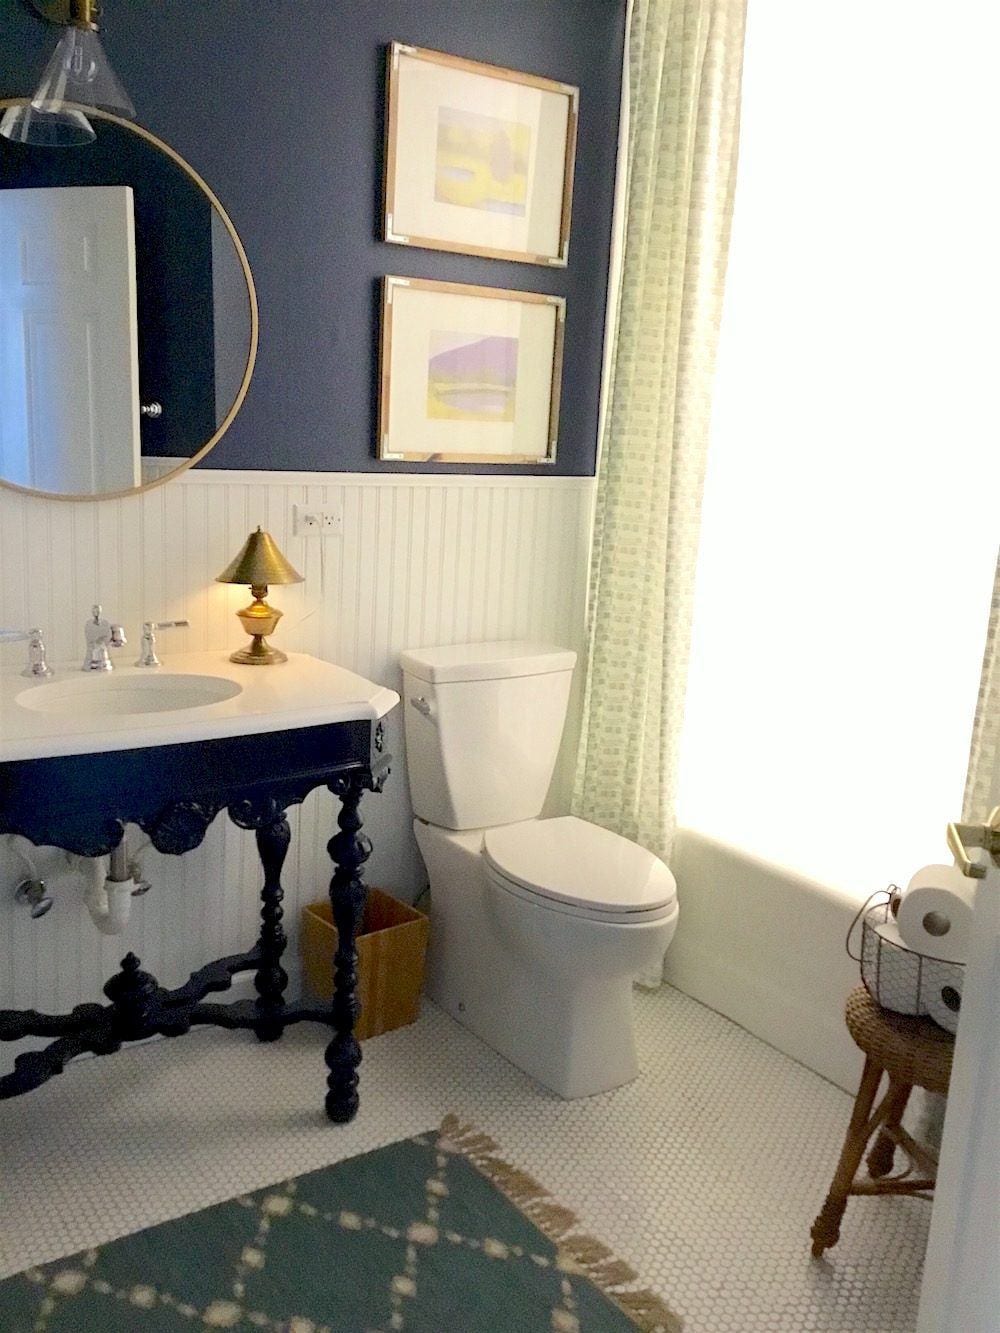 painted antique table in a bathroom used as a vanity